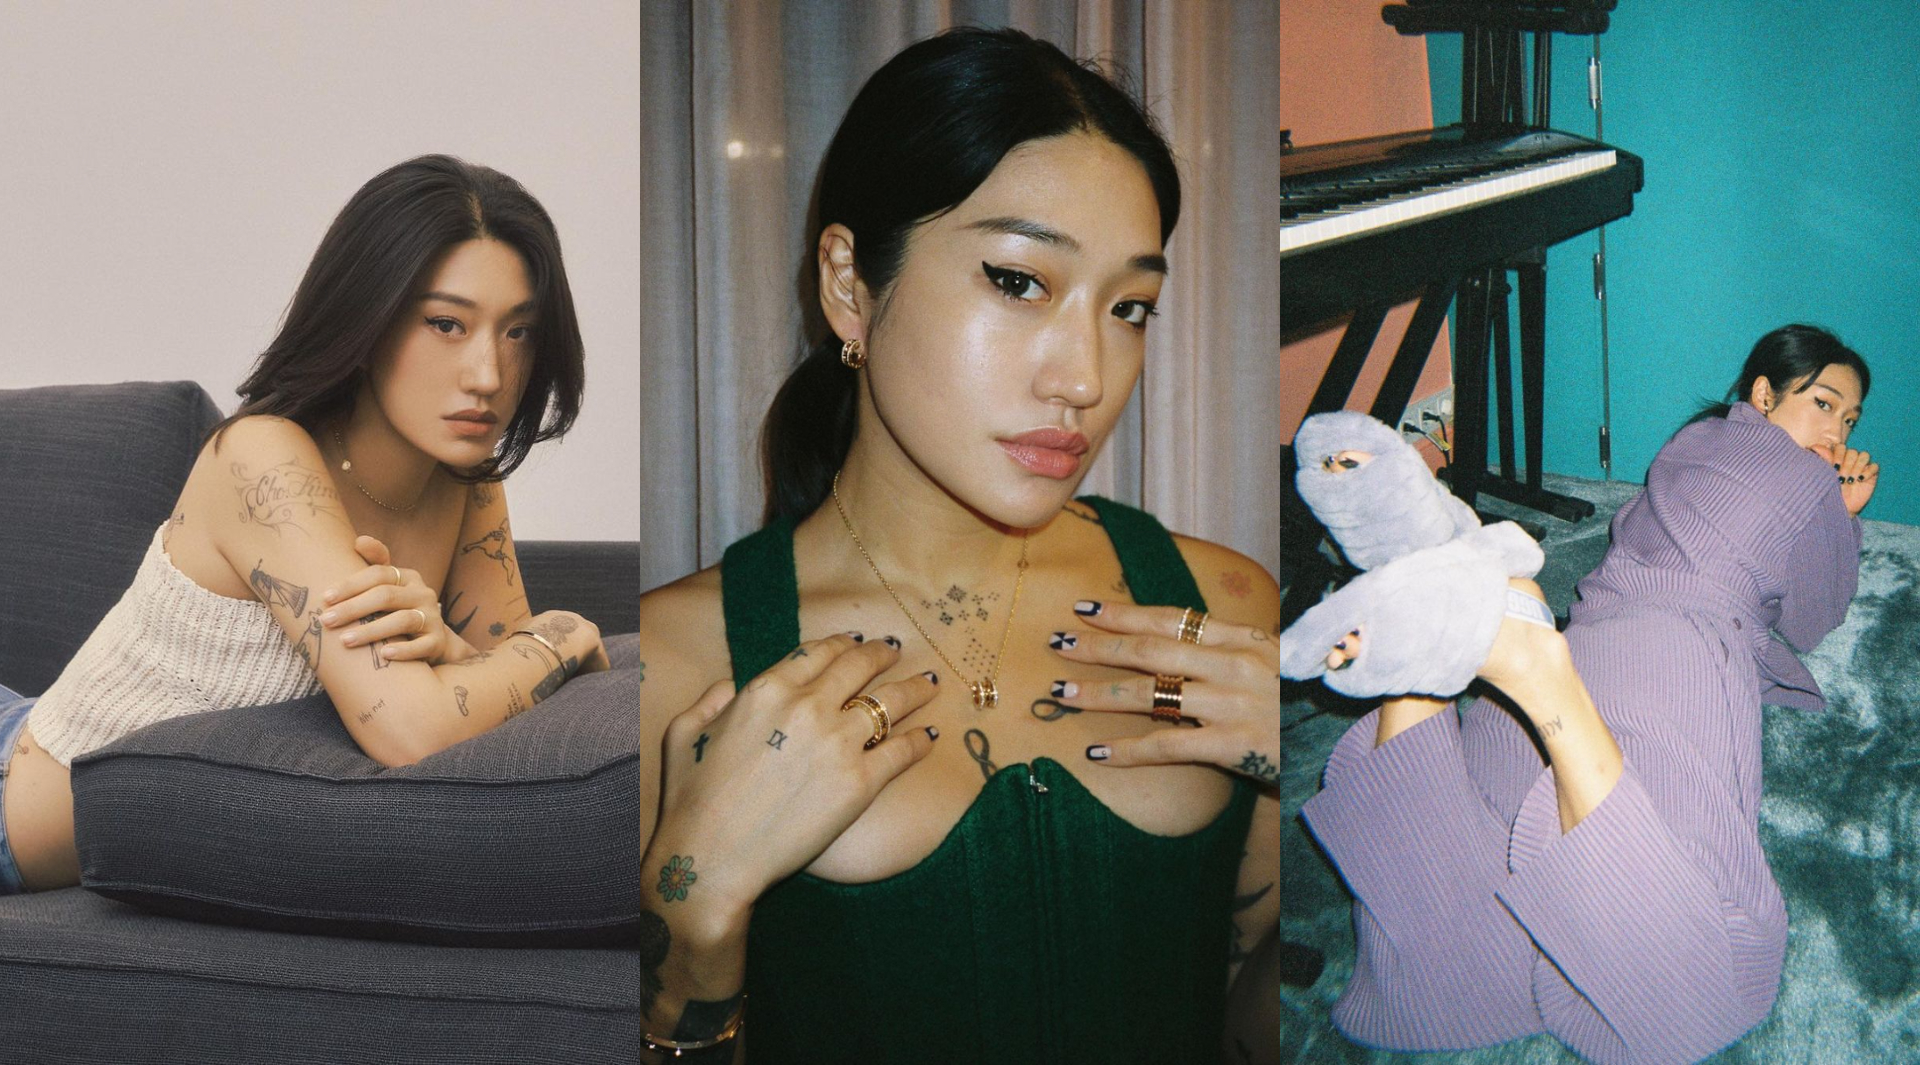 Peggy Gou to launch her own record label and fashion line - DJ Mag